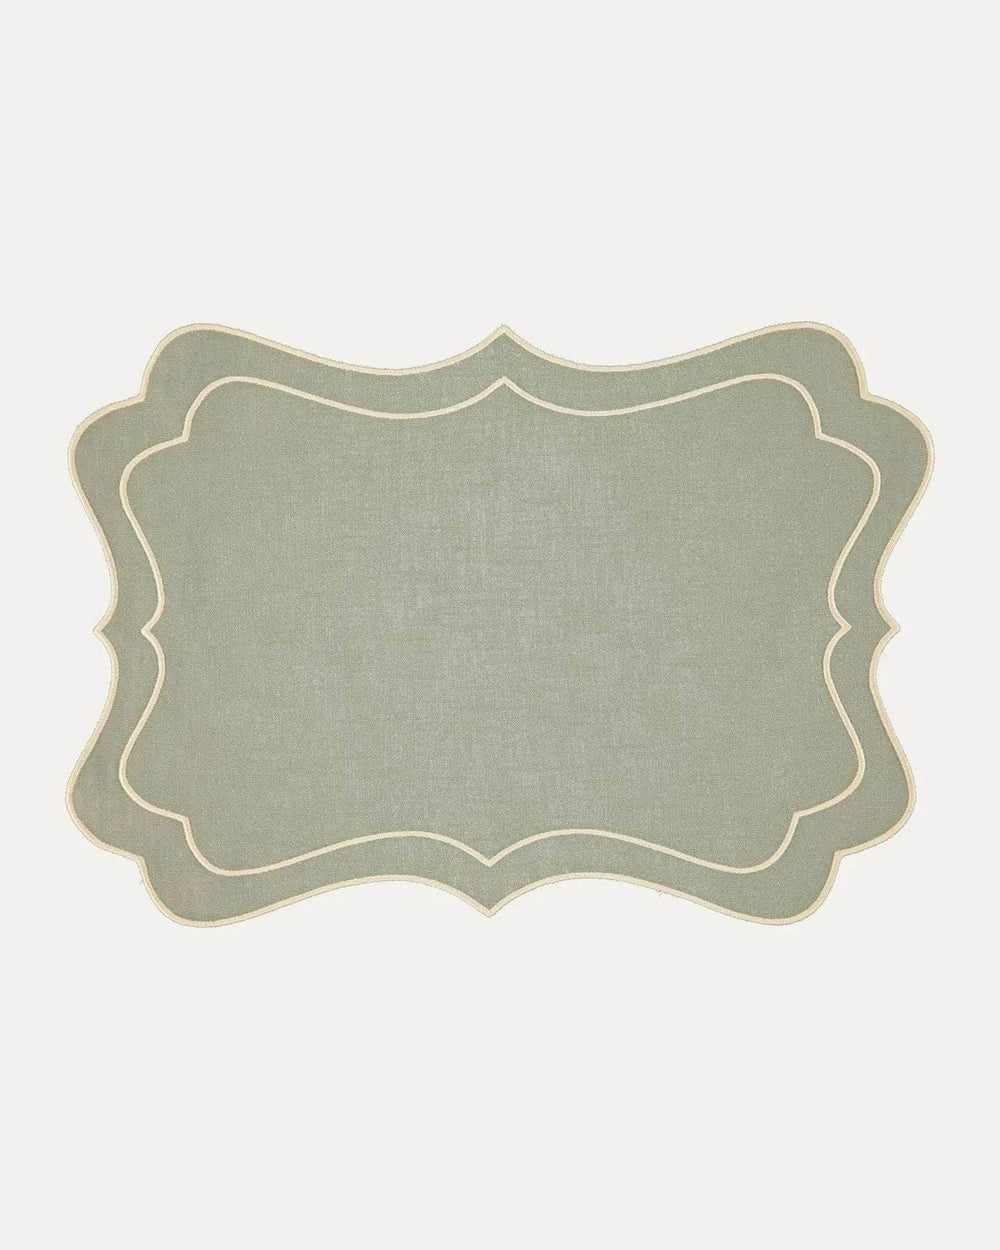 Brisa Placemat, Green with Ivory